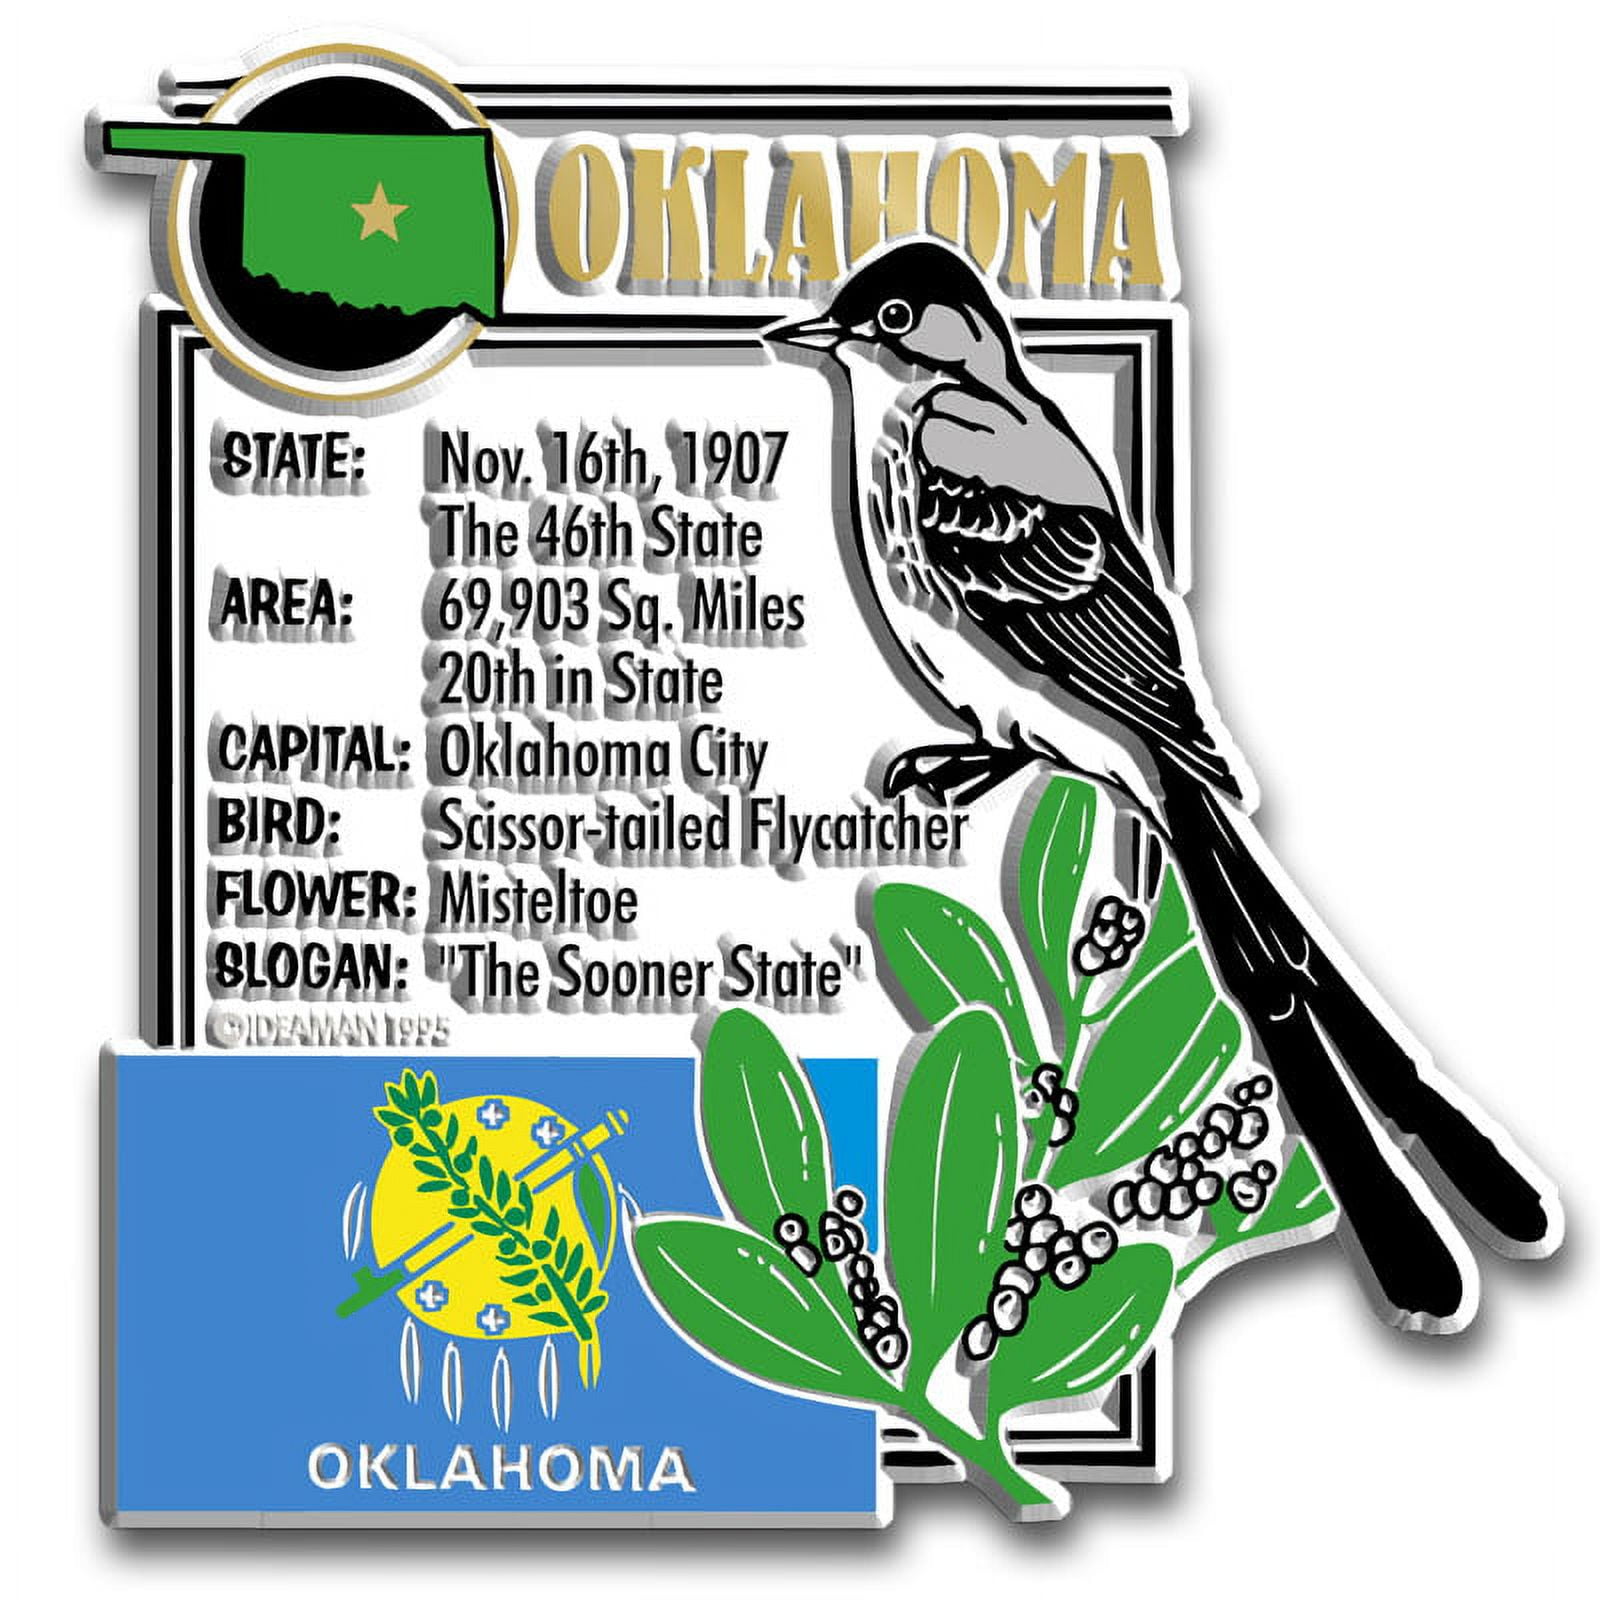 Oklahoma State Montage Magnet by Classic Magnets, 3.1 x 3.2 